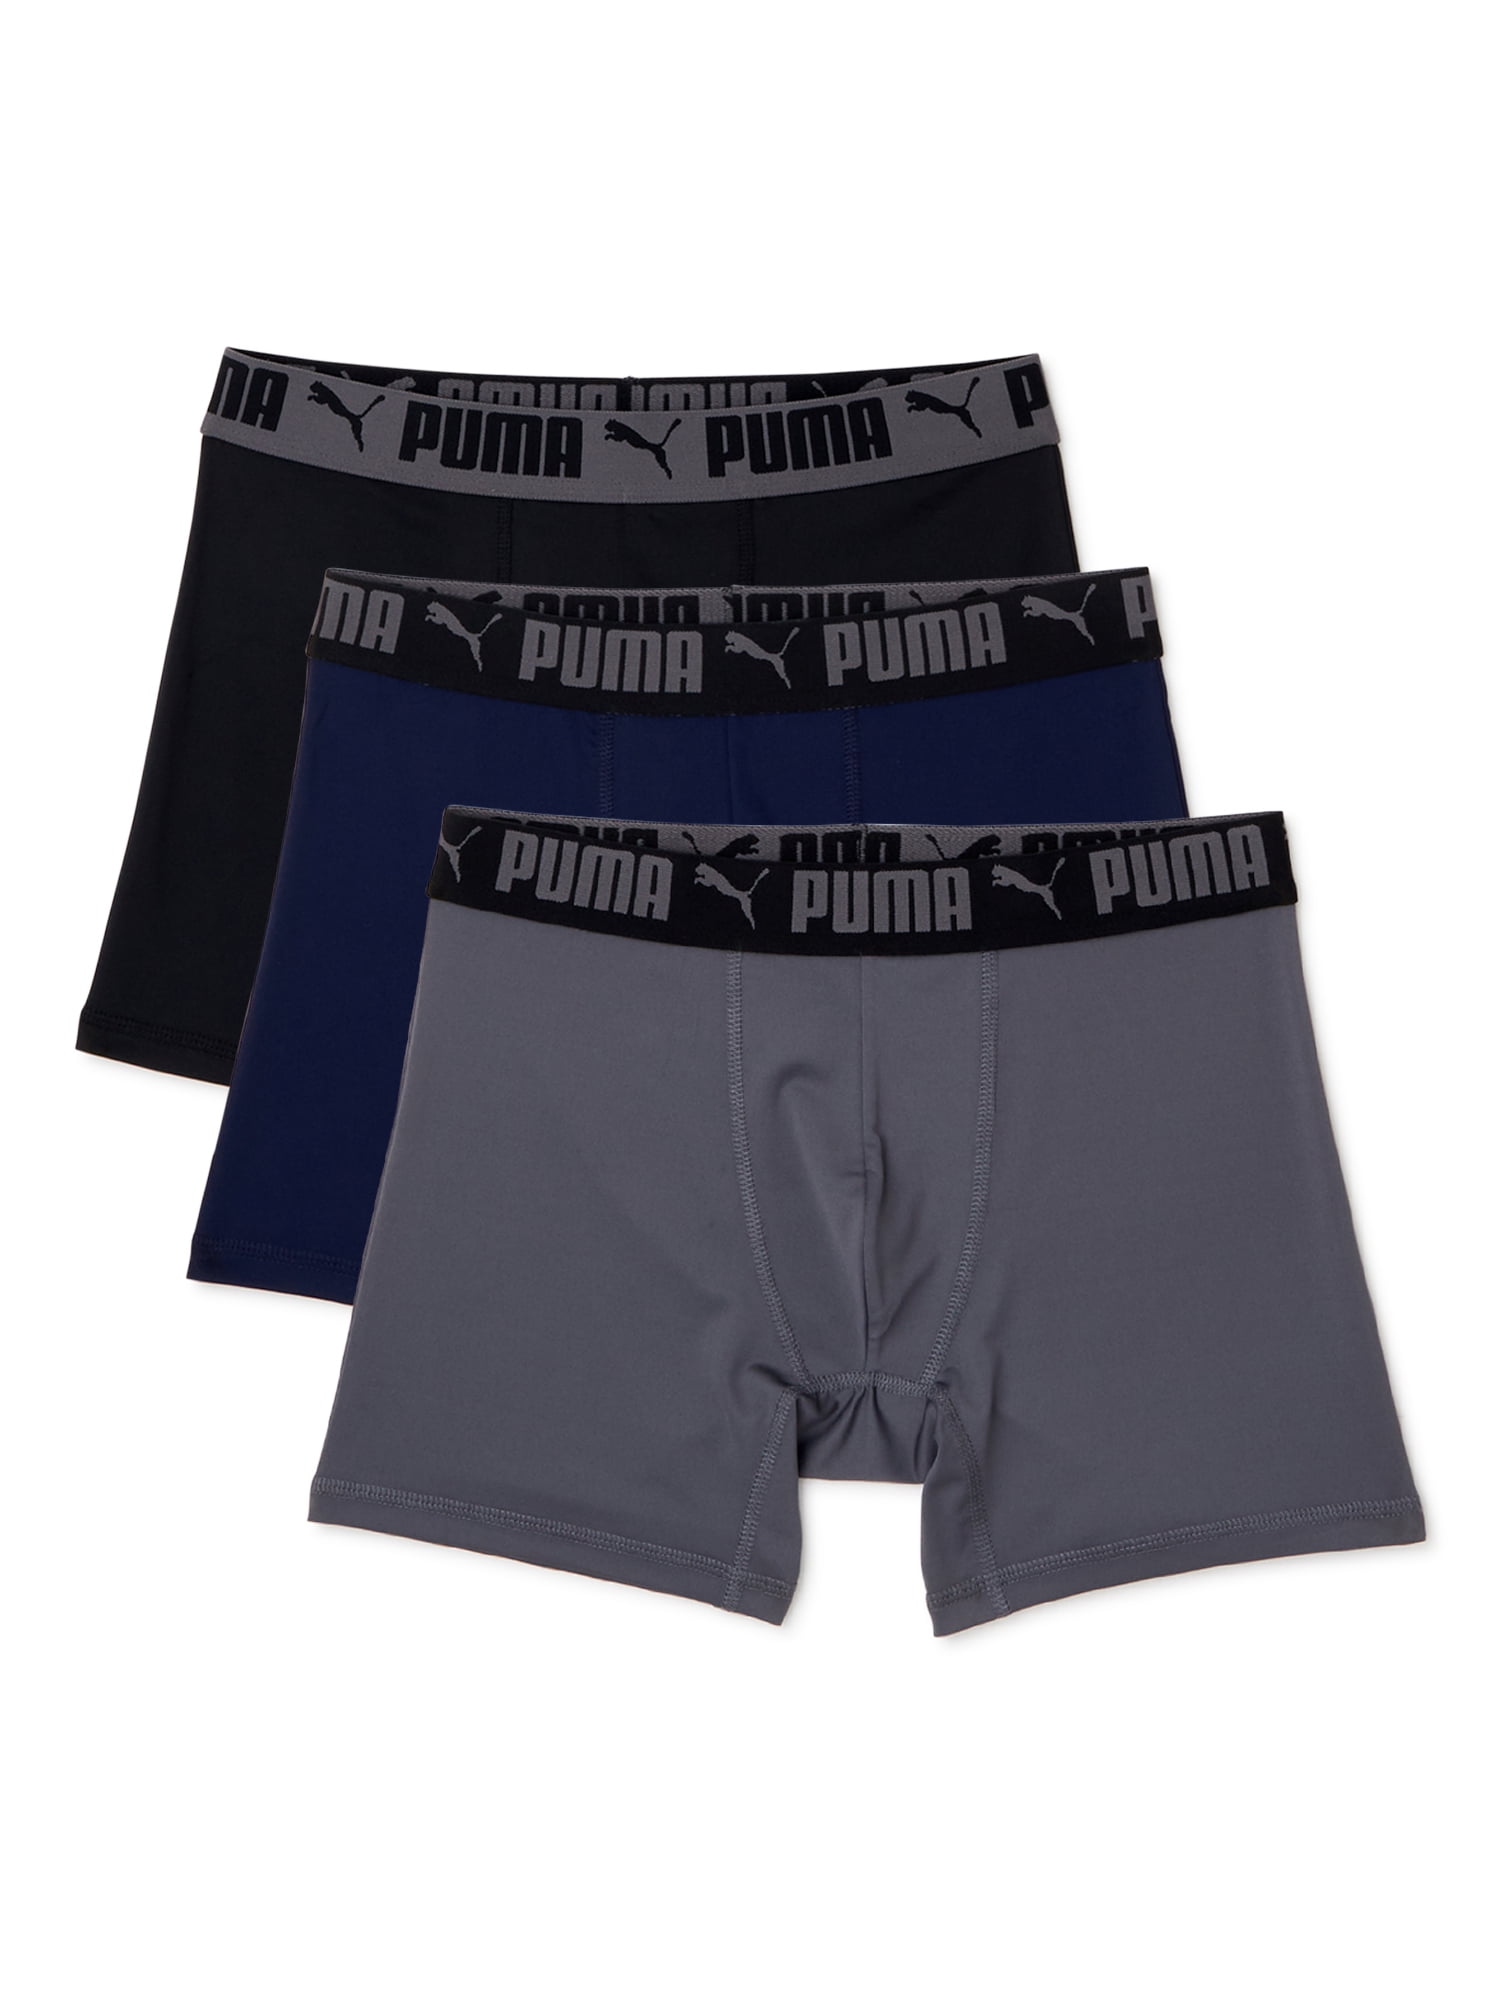 Puma Men’s 3 Pack Boxer Brief Sport Mesh Moisture Wicking Size Small NWT